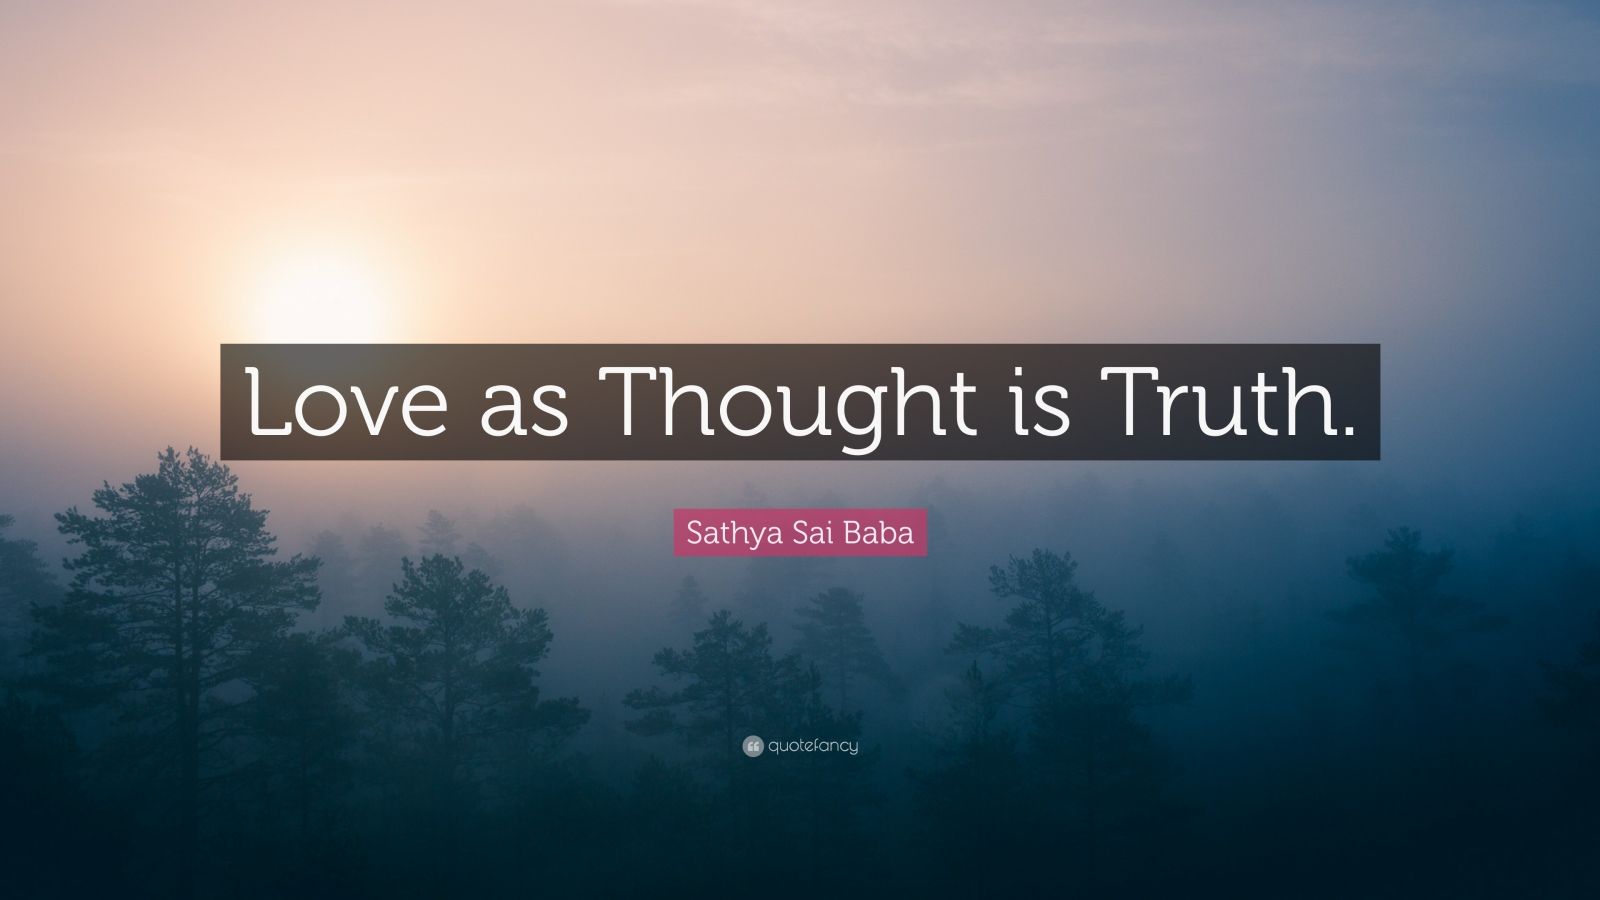 Sathya Sai Baba Quote: "Love as Thought is Truth." (10 ...